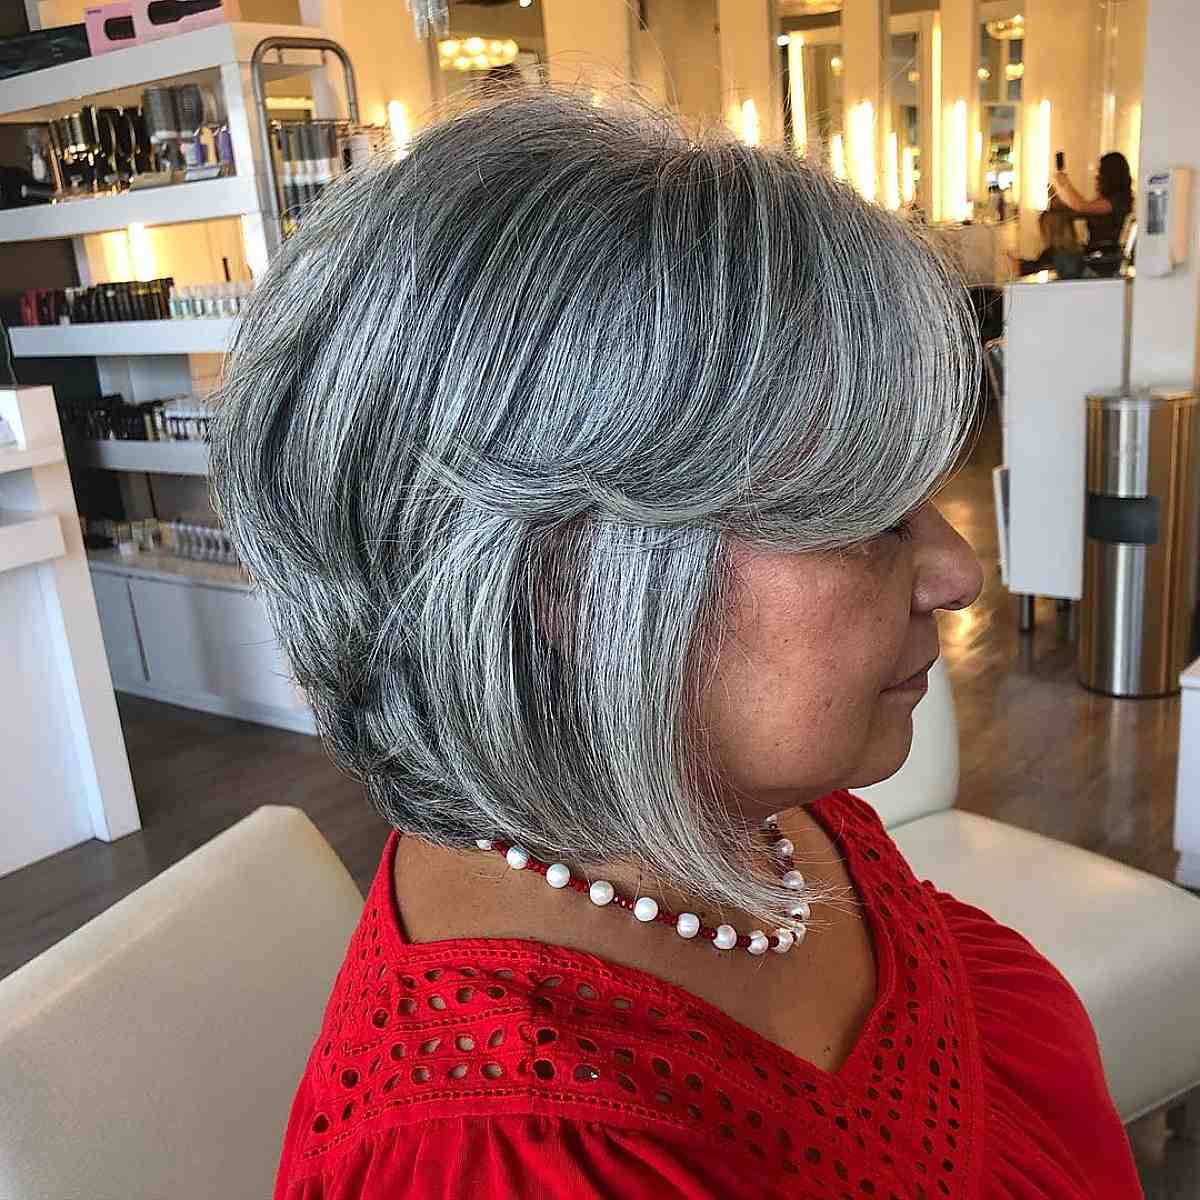 Graduated bob for women over 60 with salt-and-pepper hair